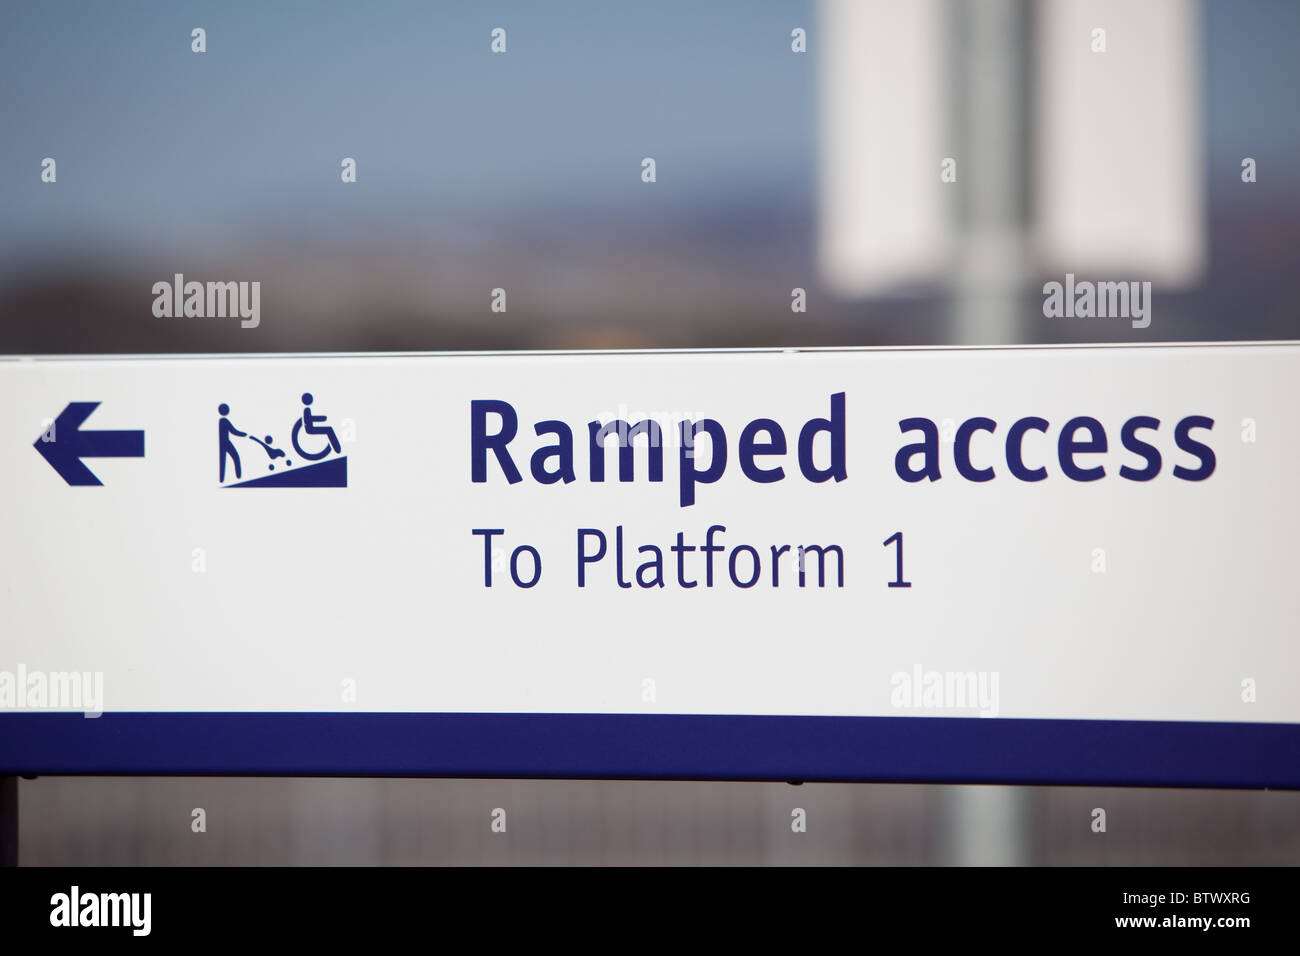 modern railway station signs for ramped access for prams and for those with disabilities Stock Photo